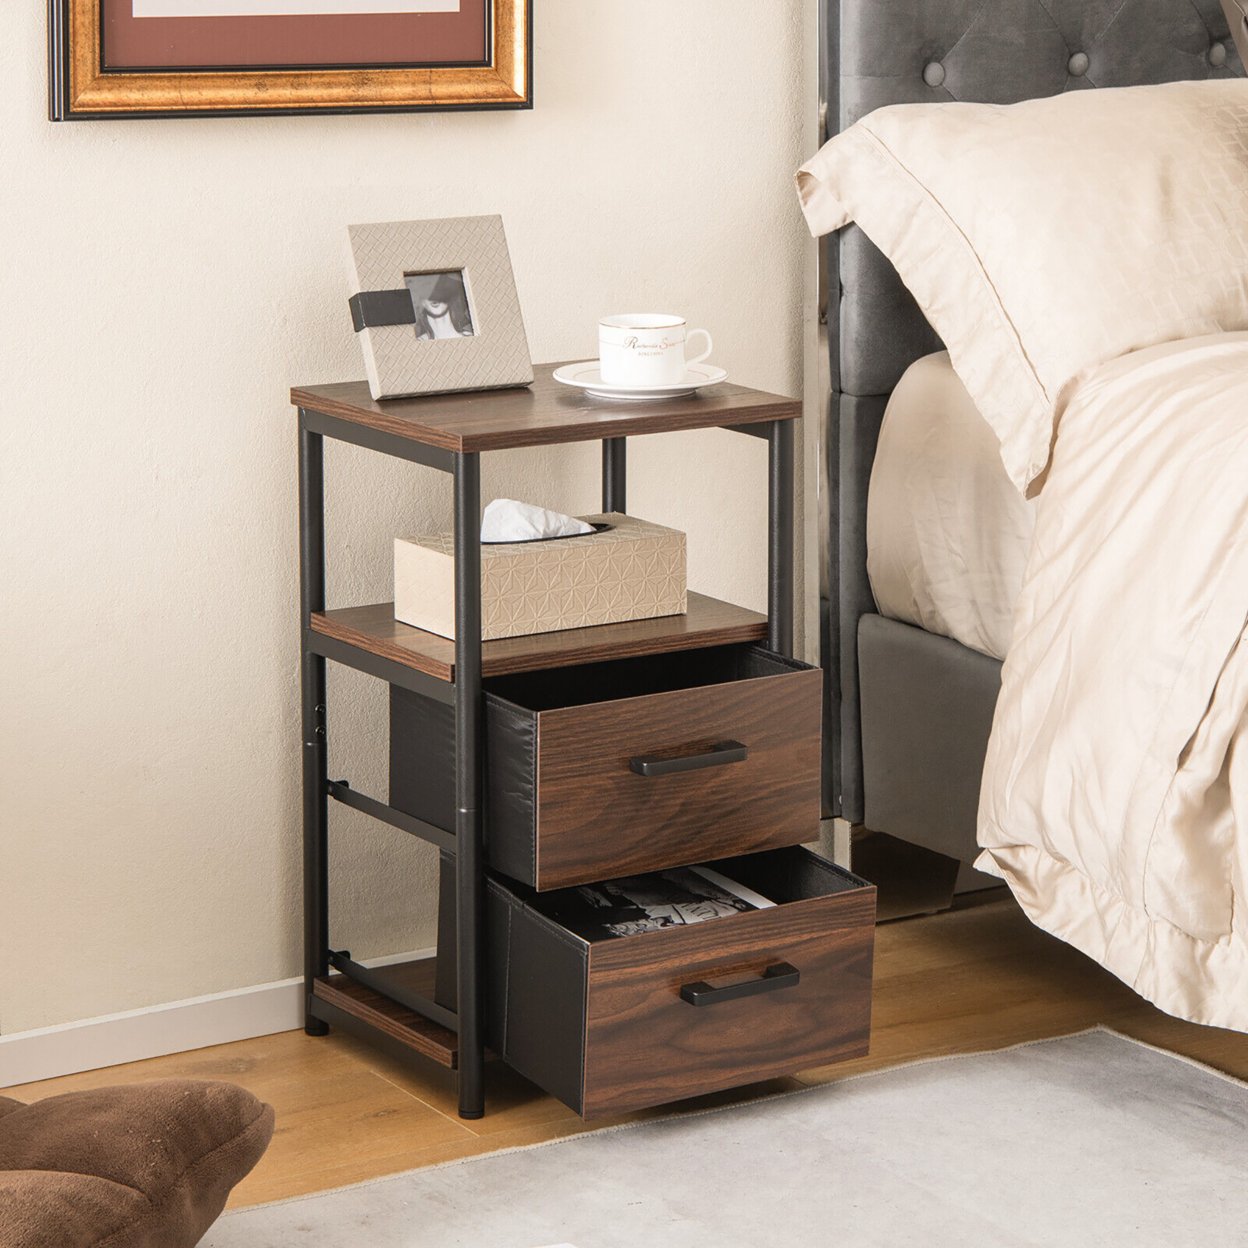 2PCS Nightstand Bedside End Table With 2 Fabric Drawers & Storage Shelf